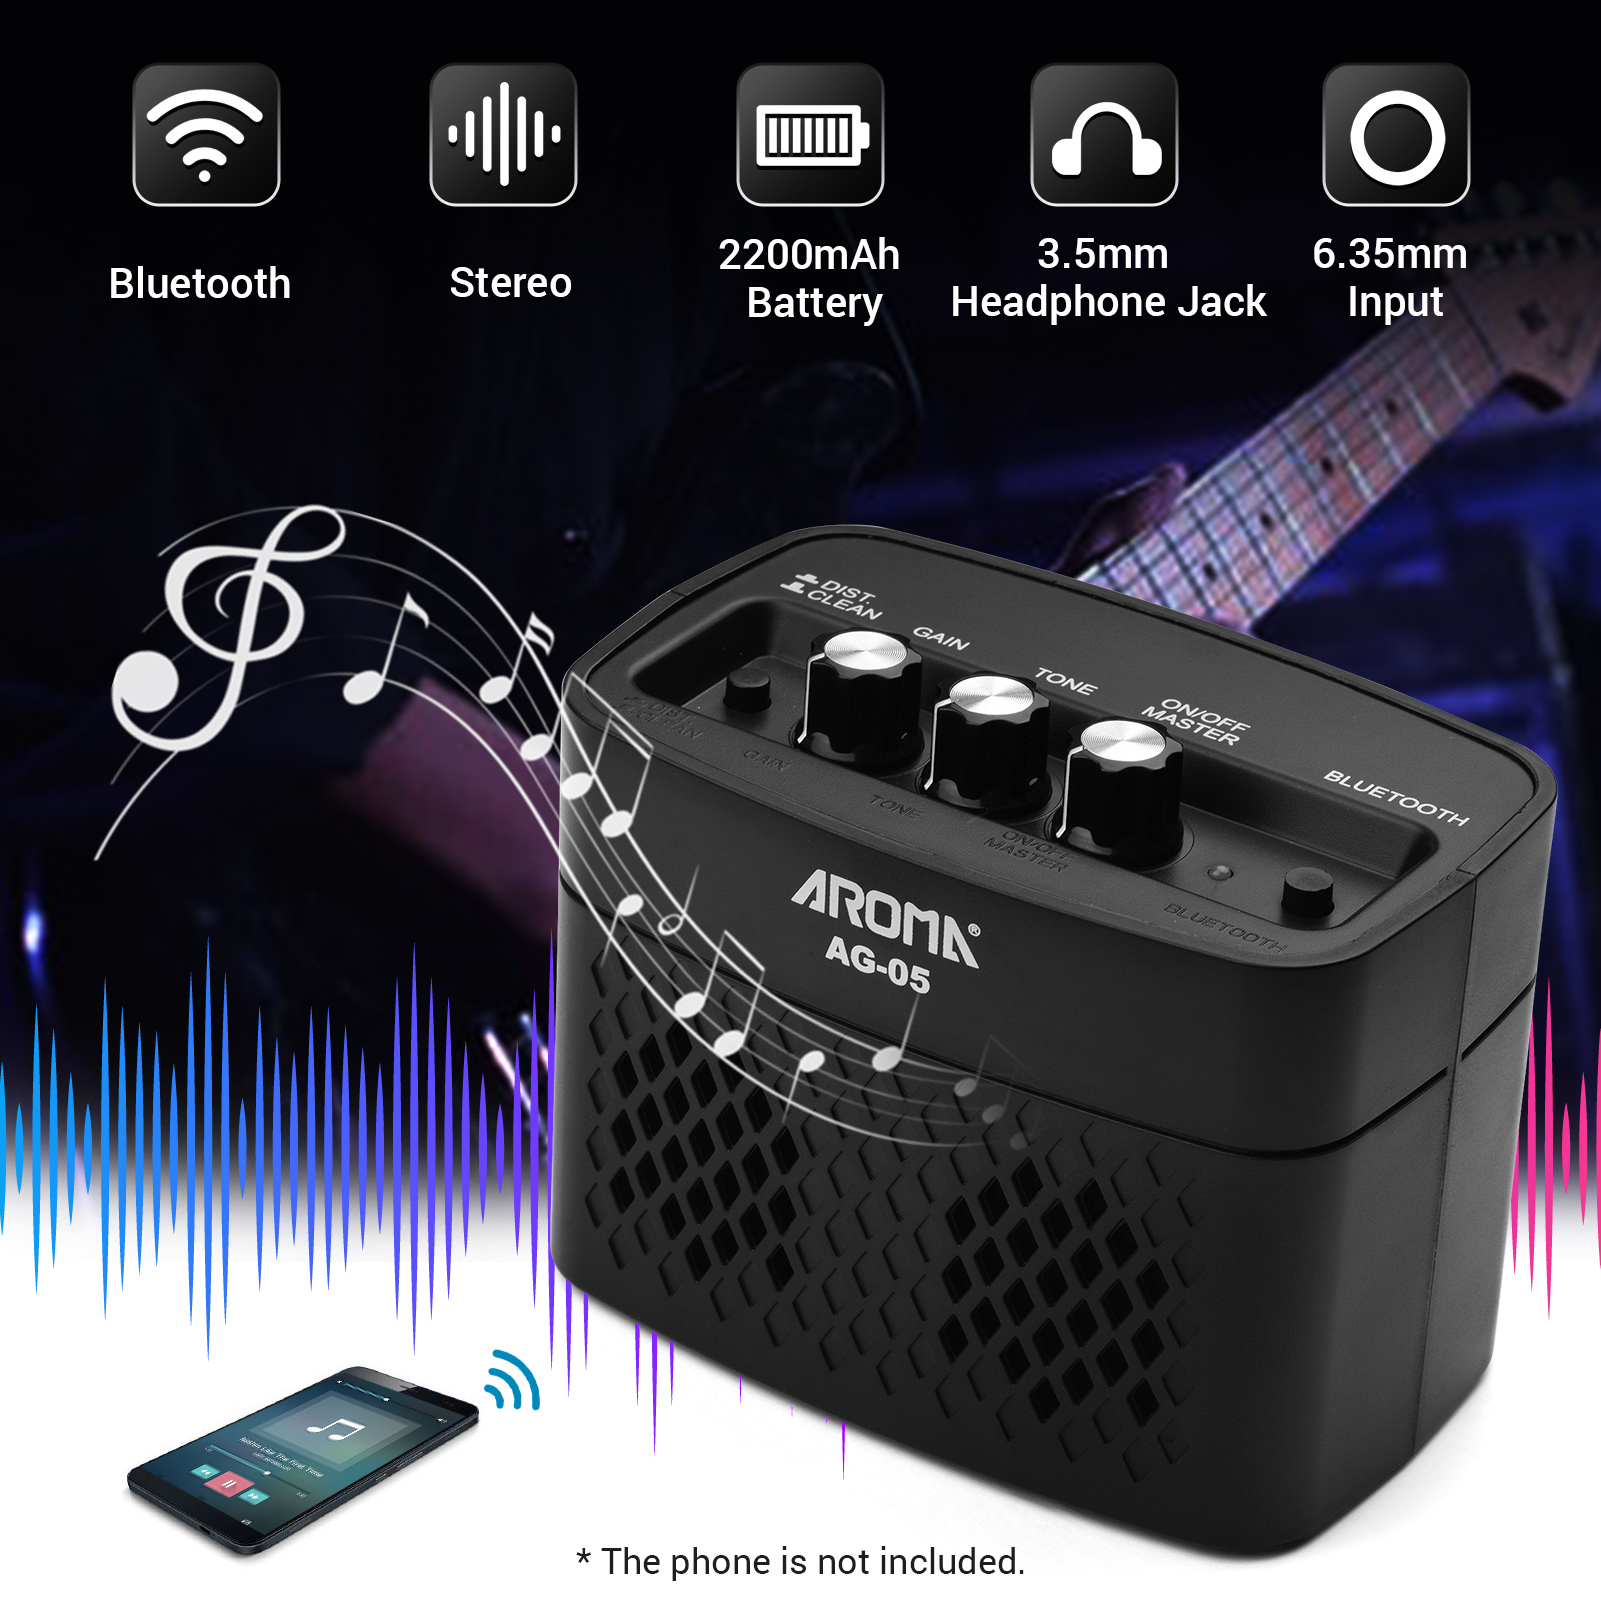 5W 9V Mini Electric Guitar Amplifier Mini Portable Compact Bluetooth Speaker Headphone Amp Volume Tone Control with USB Cable